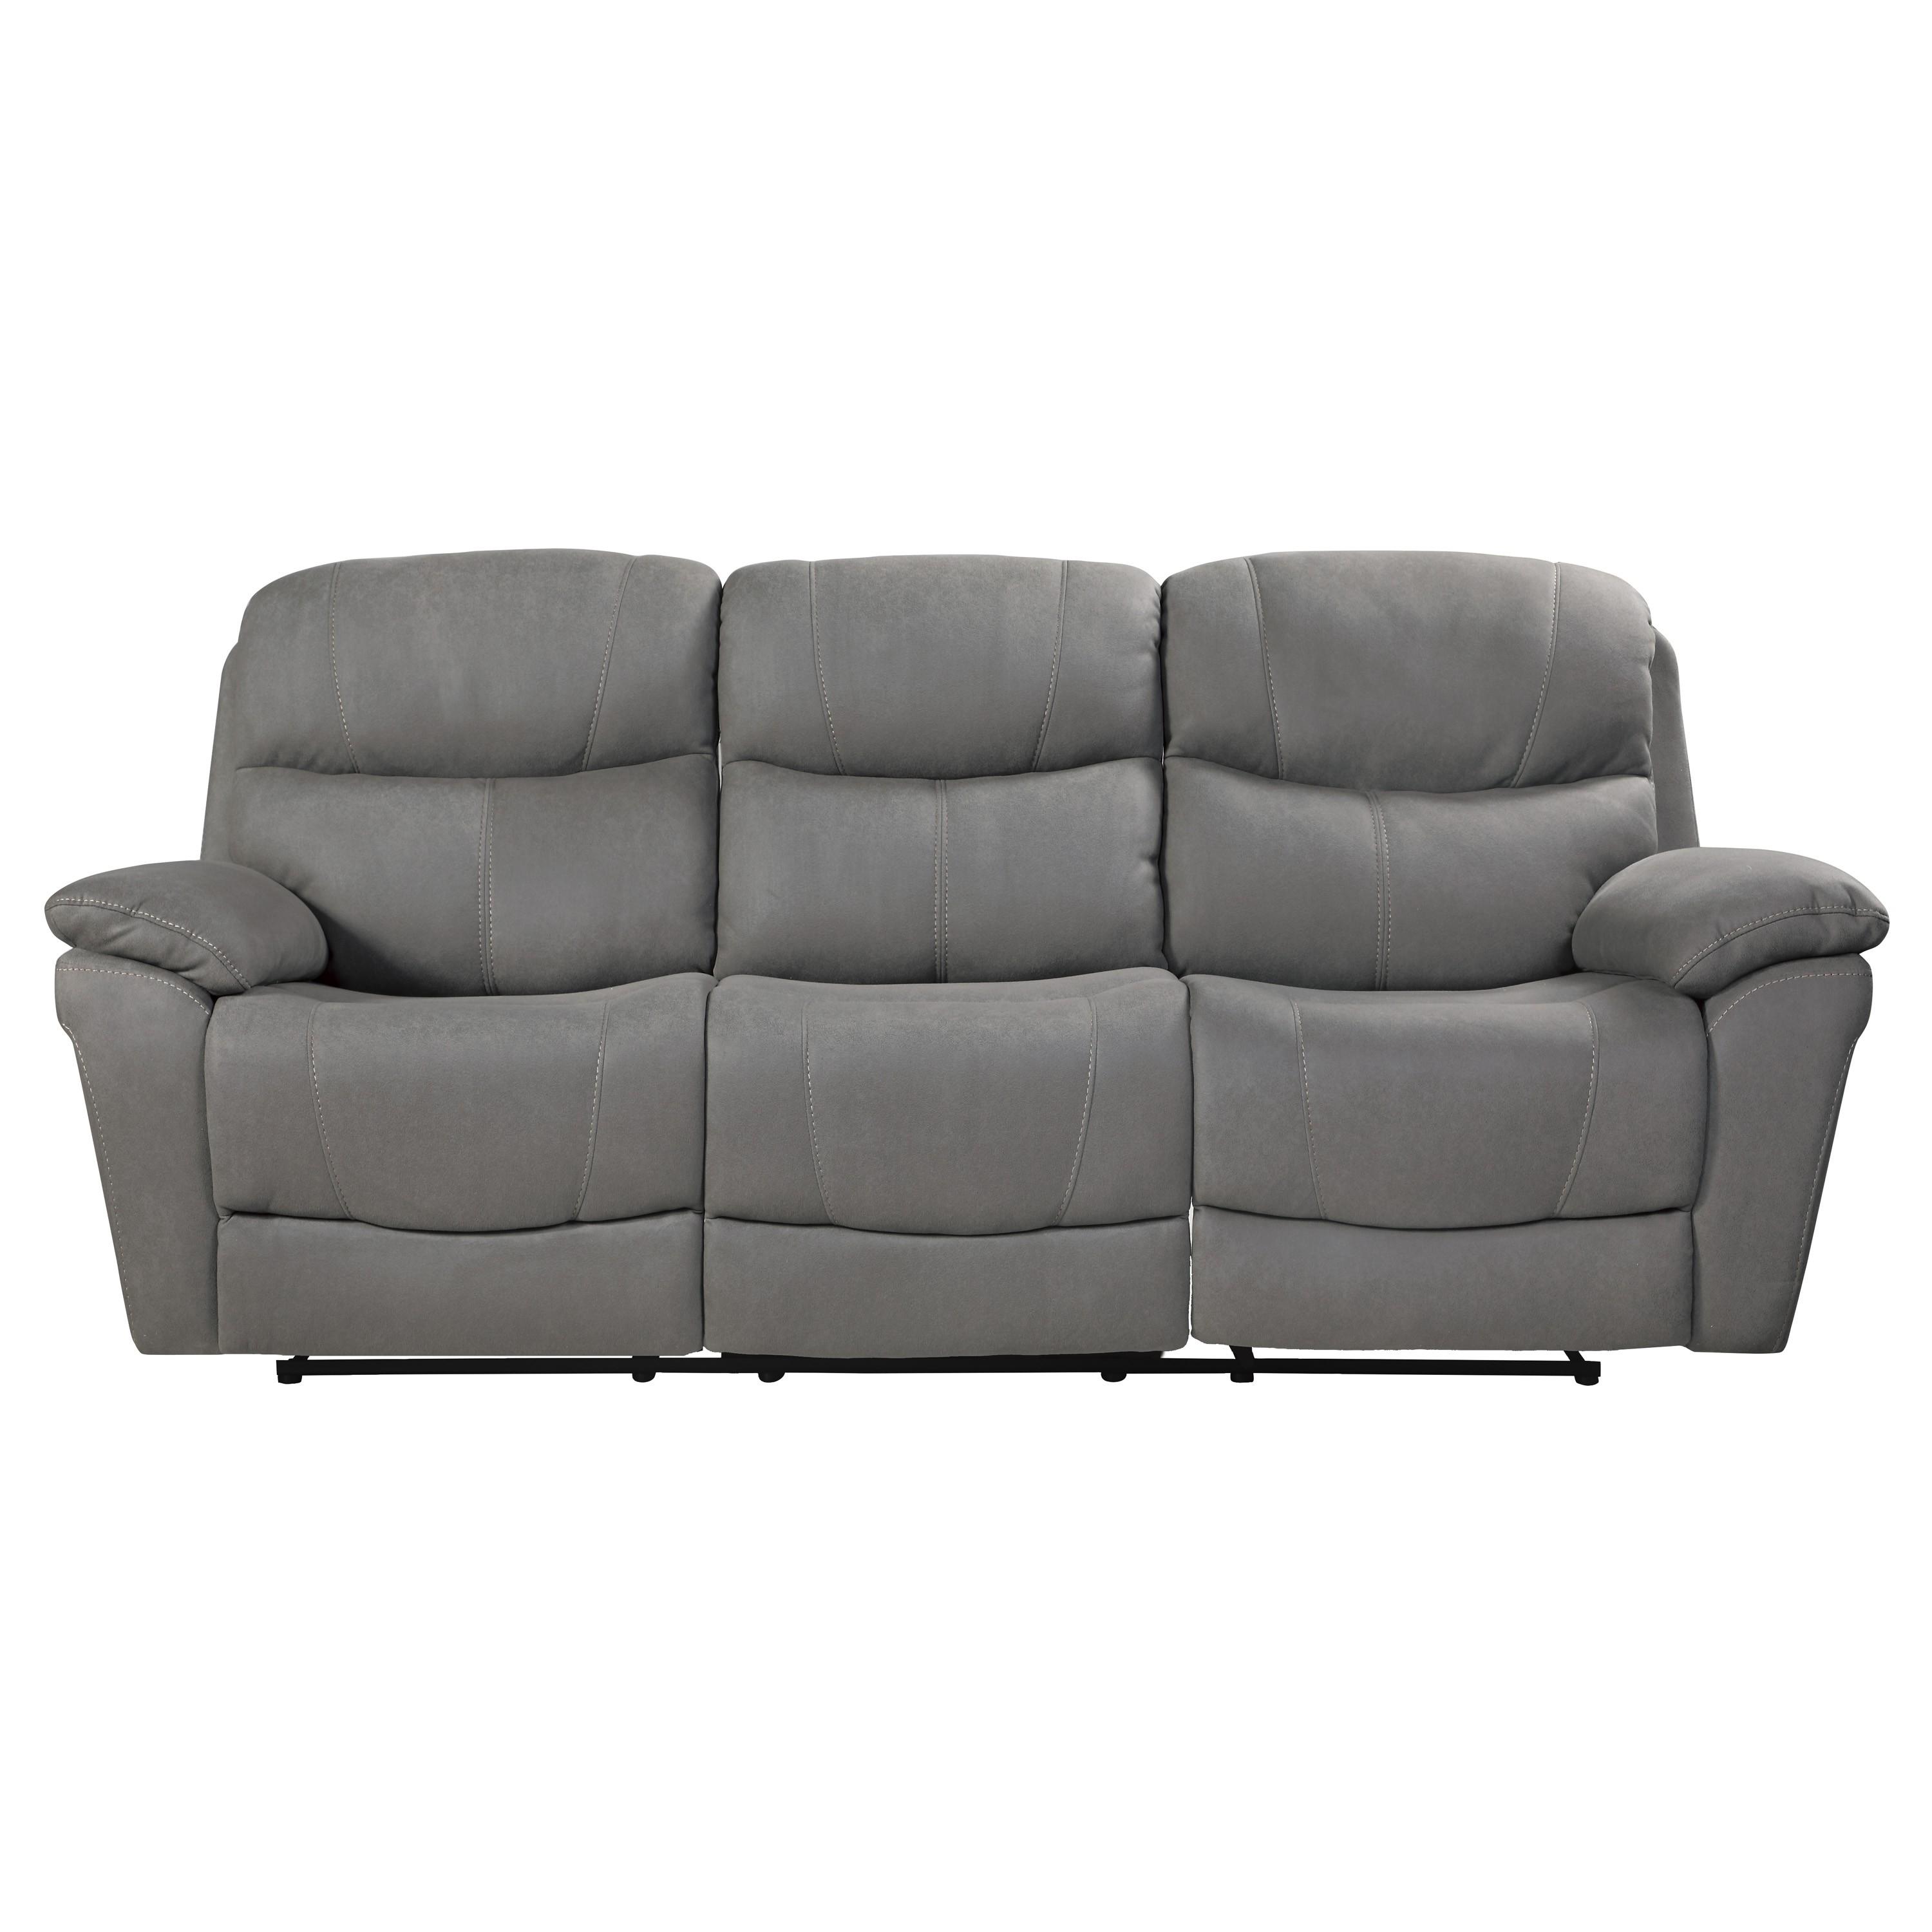 Transitional Reclining Sofa 9580GY-3 Longvale 9580GY-3 in Gray Microfiber